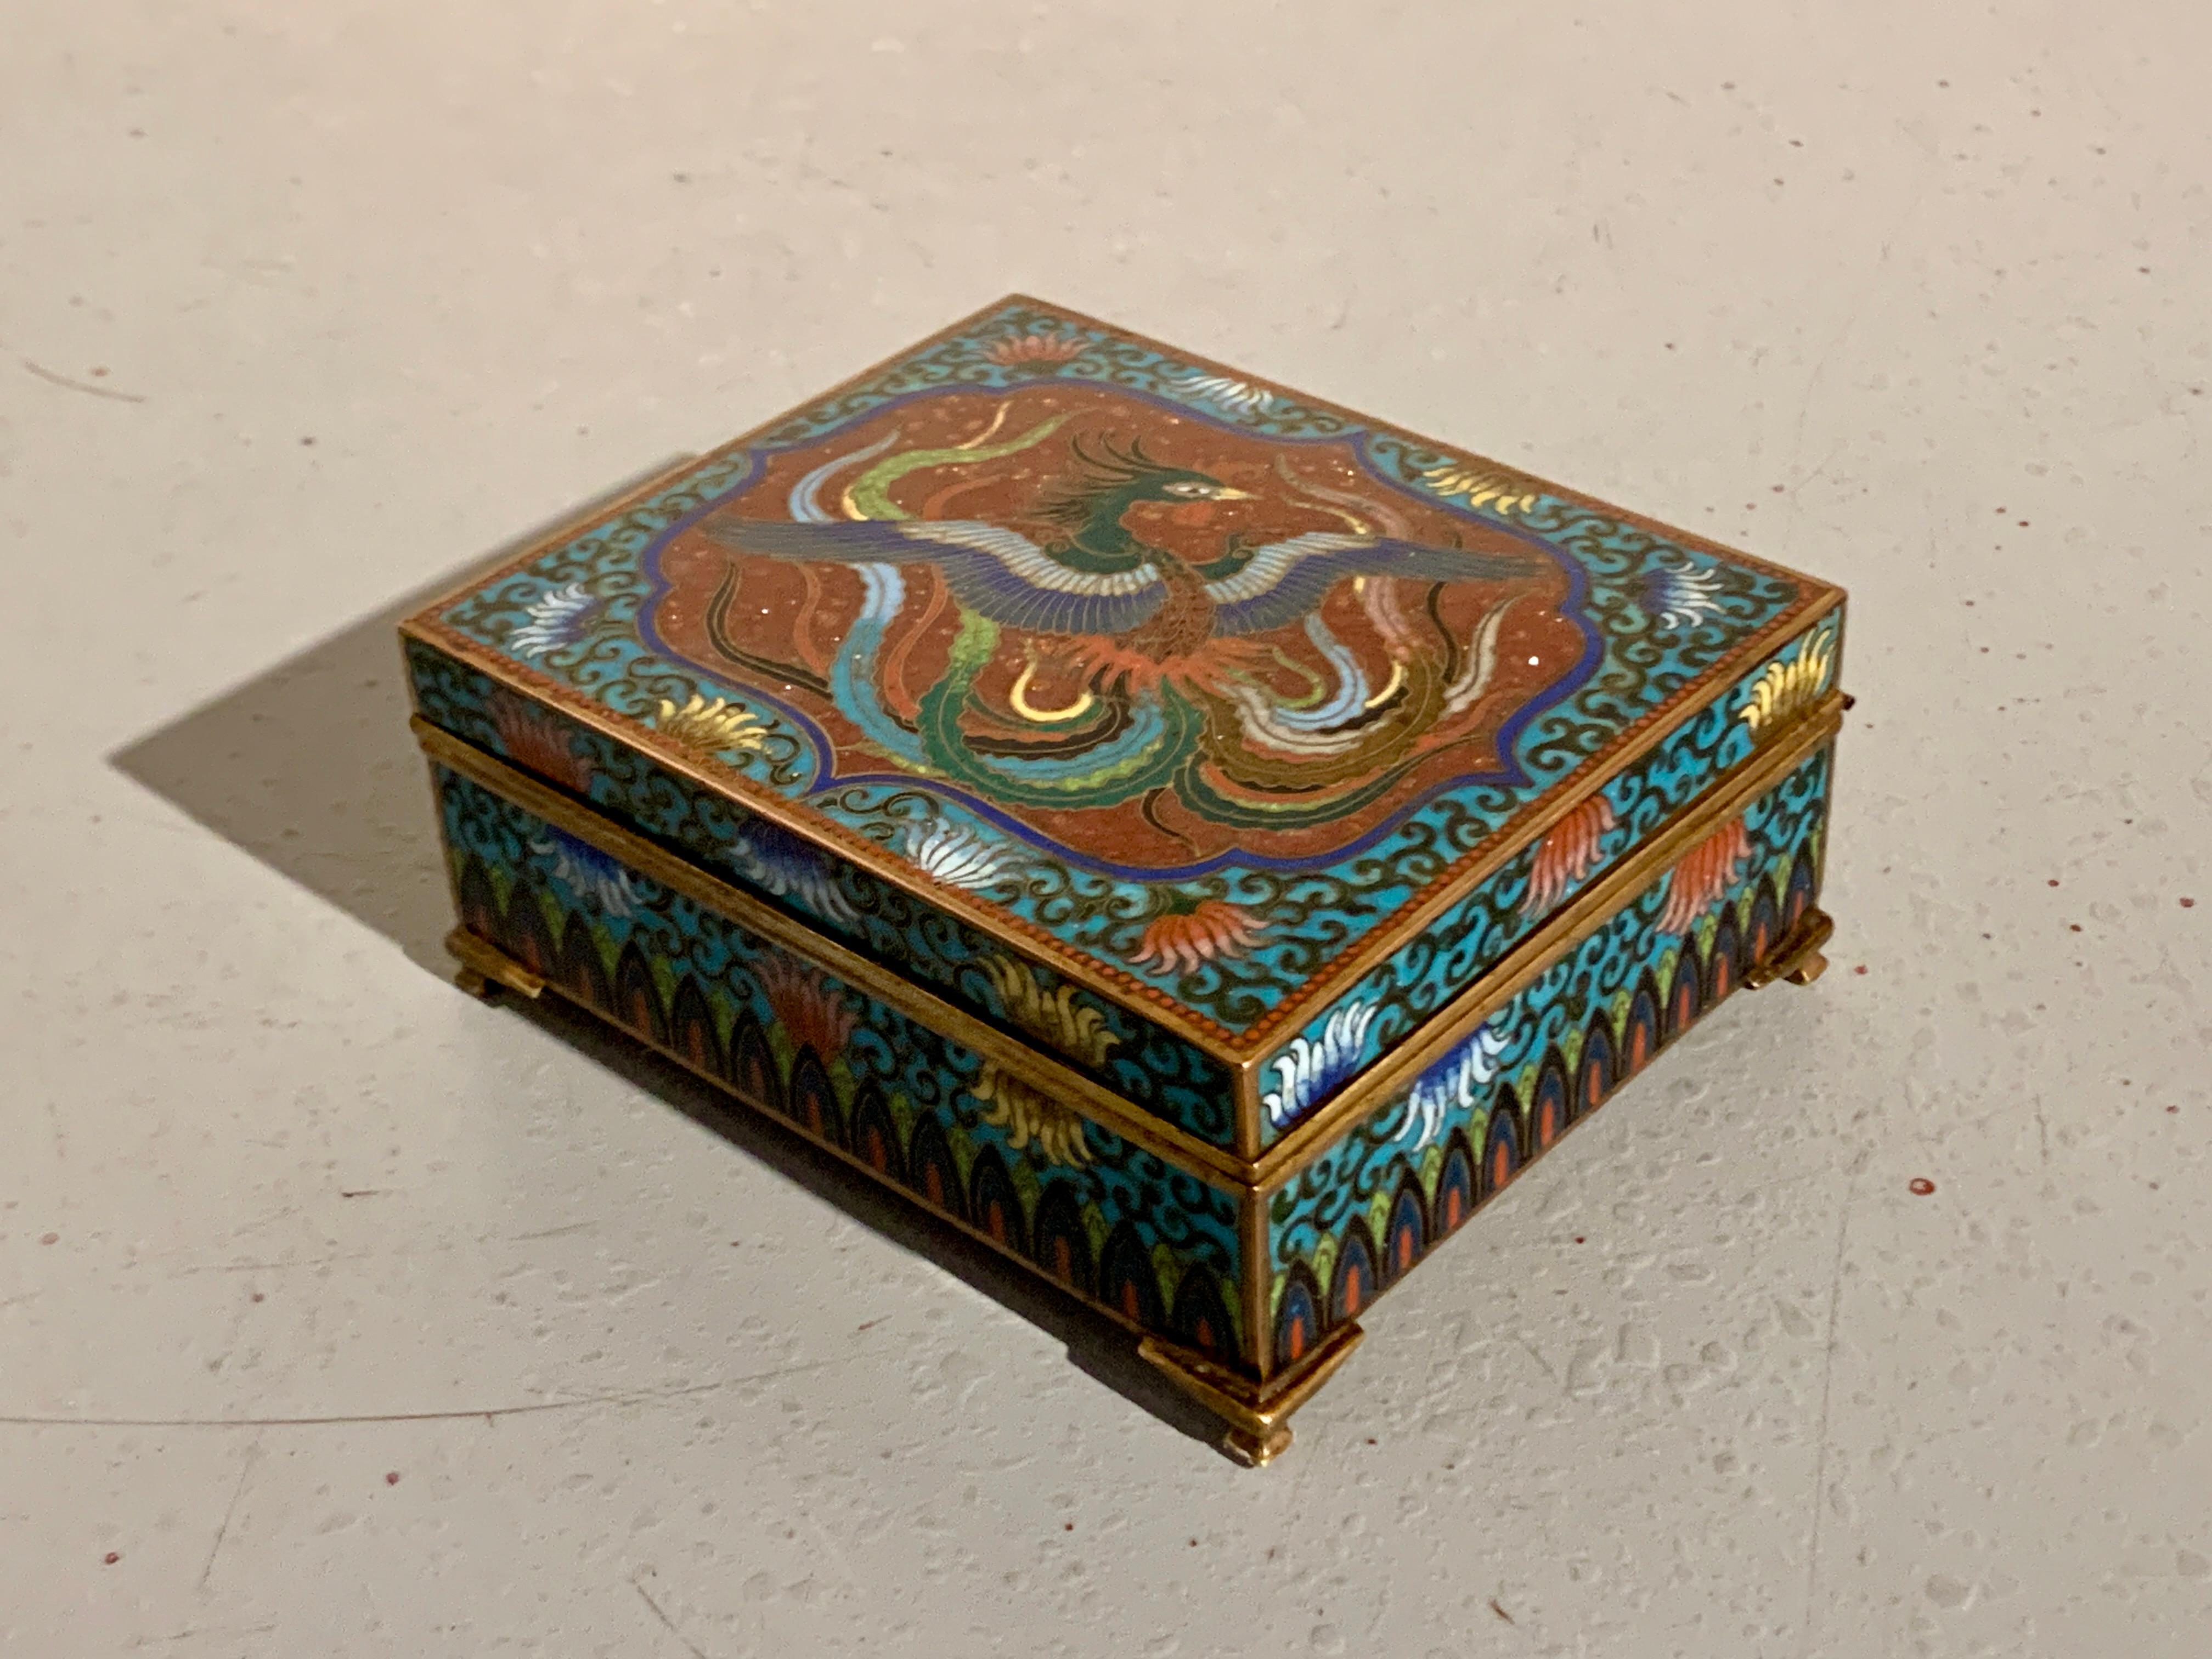 Early 20th Century Japanese Cloisonne and Goldstone Phoenix Box, Meiji Period, Japan